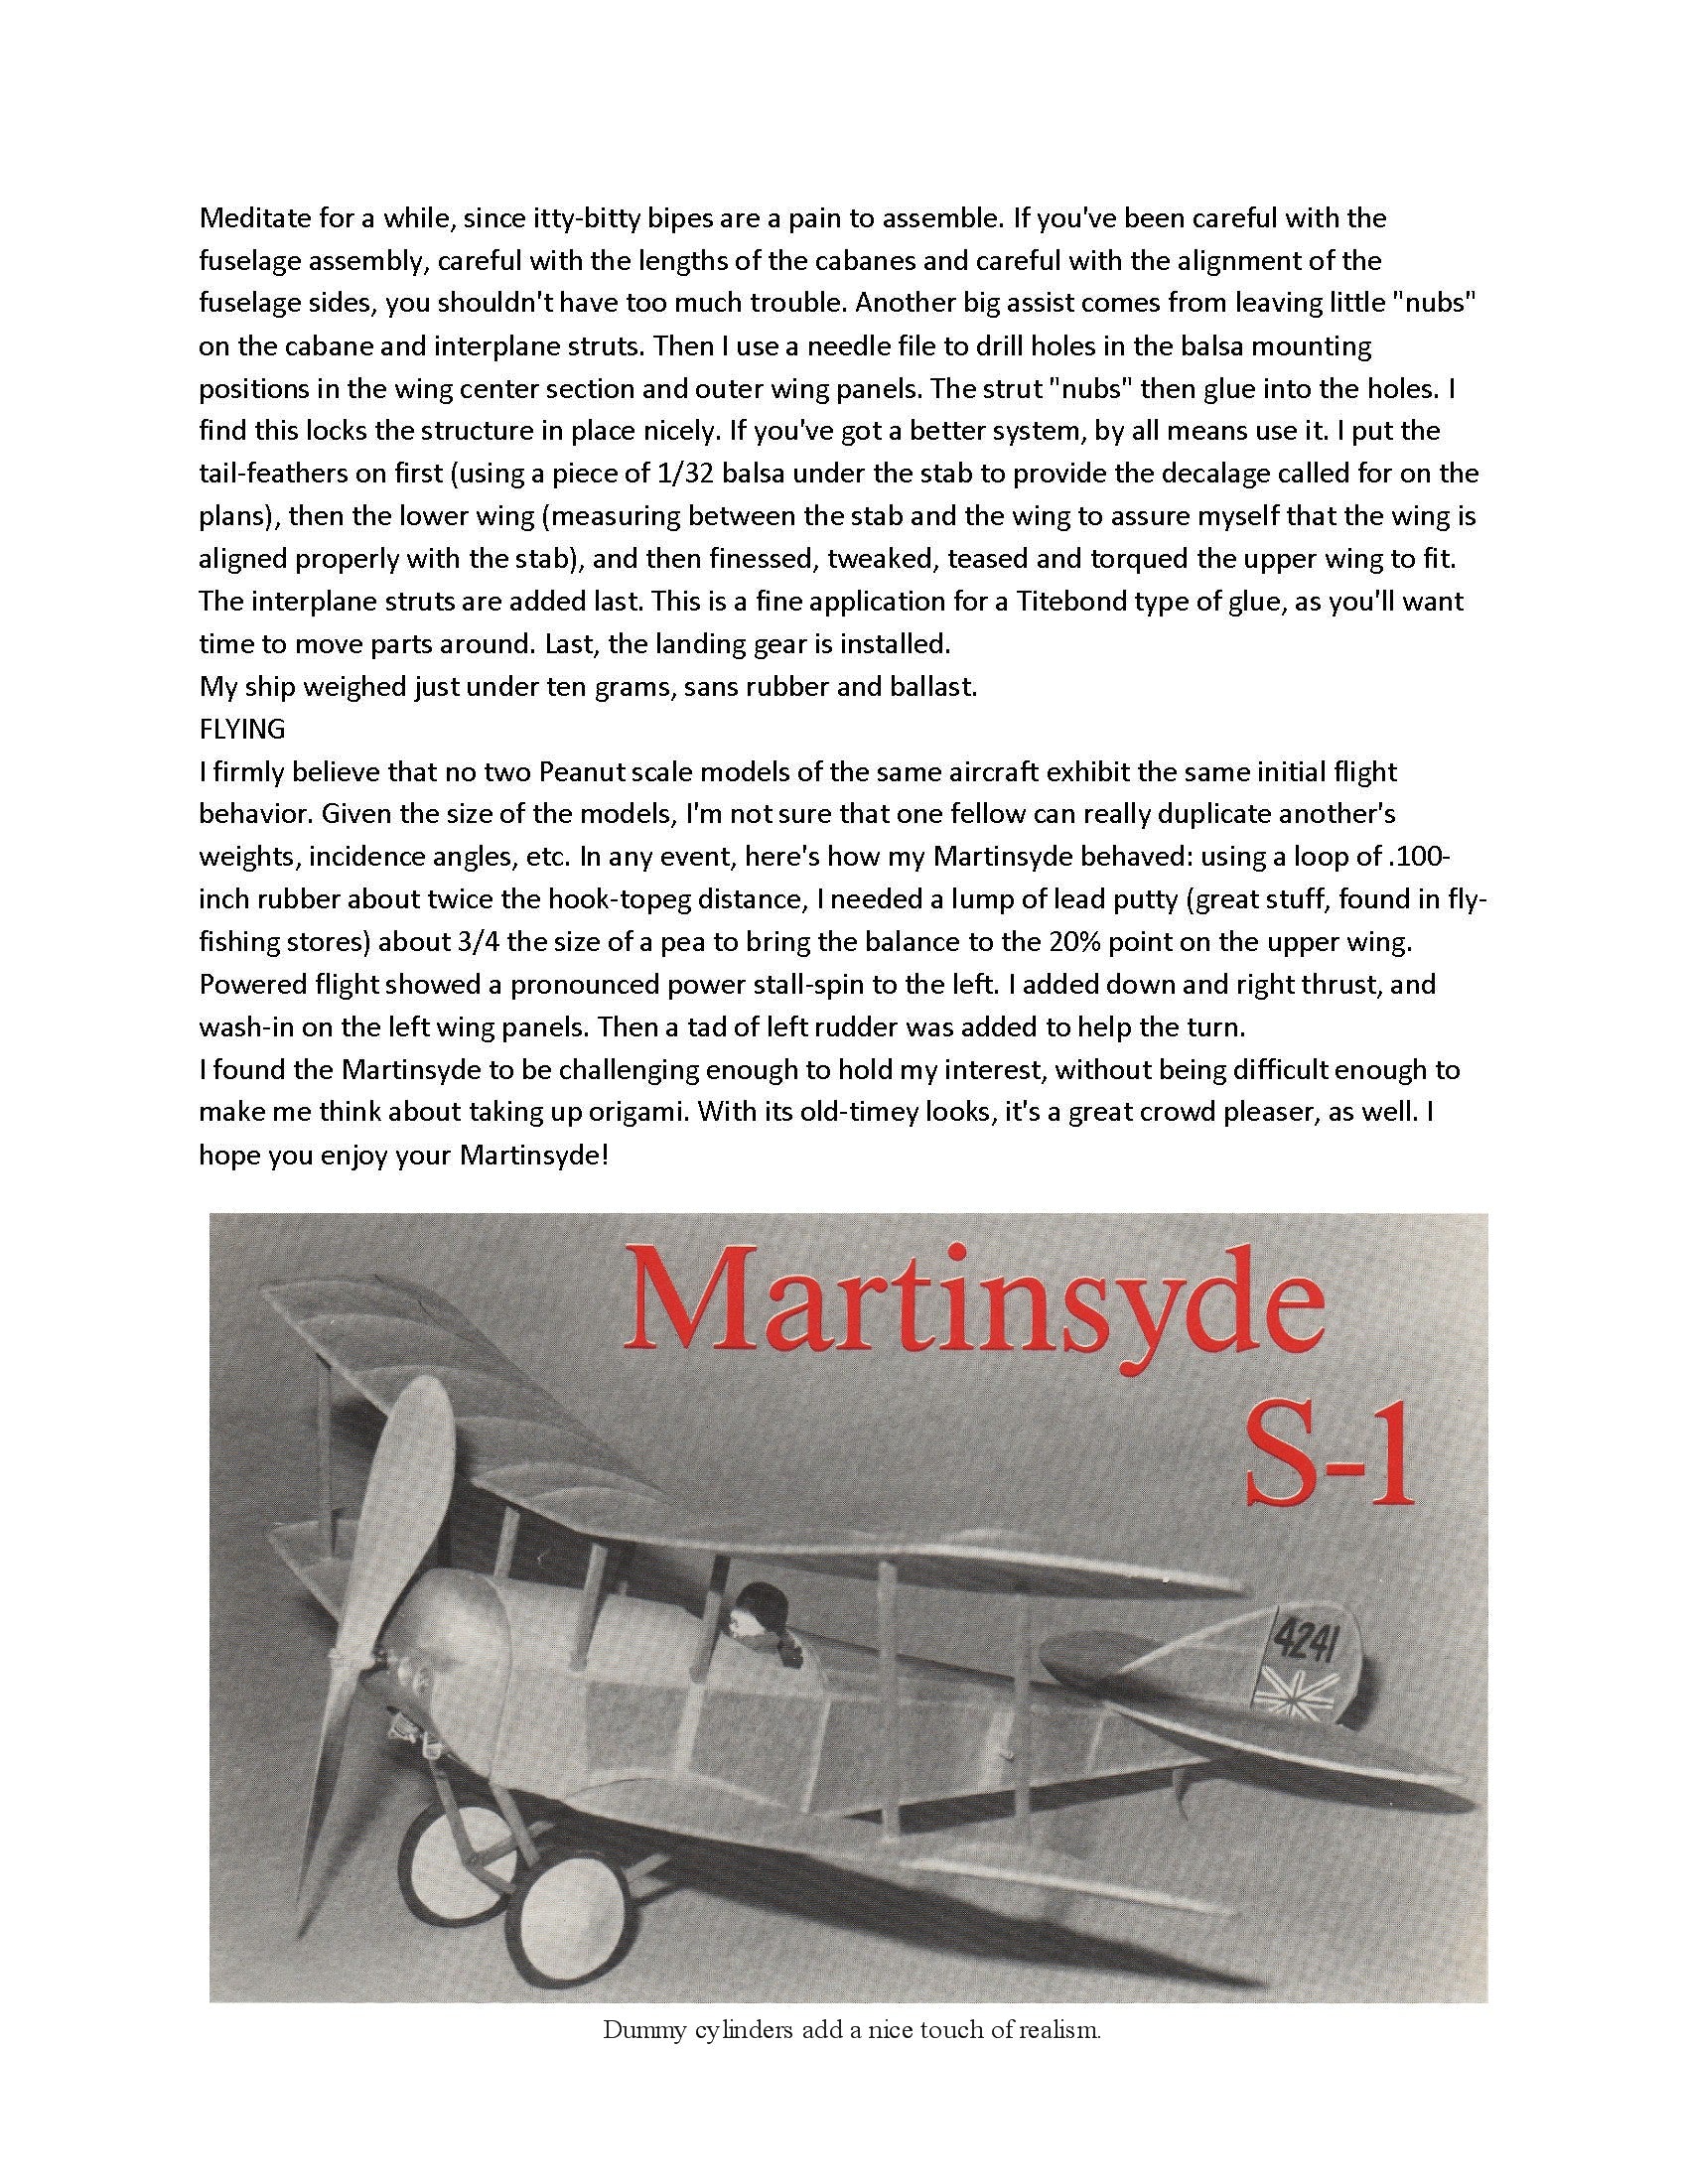 full size printed plans peanut scale “martinsyde s-1” makes it a fine choice for a first-time peanut biplane.